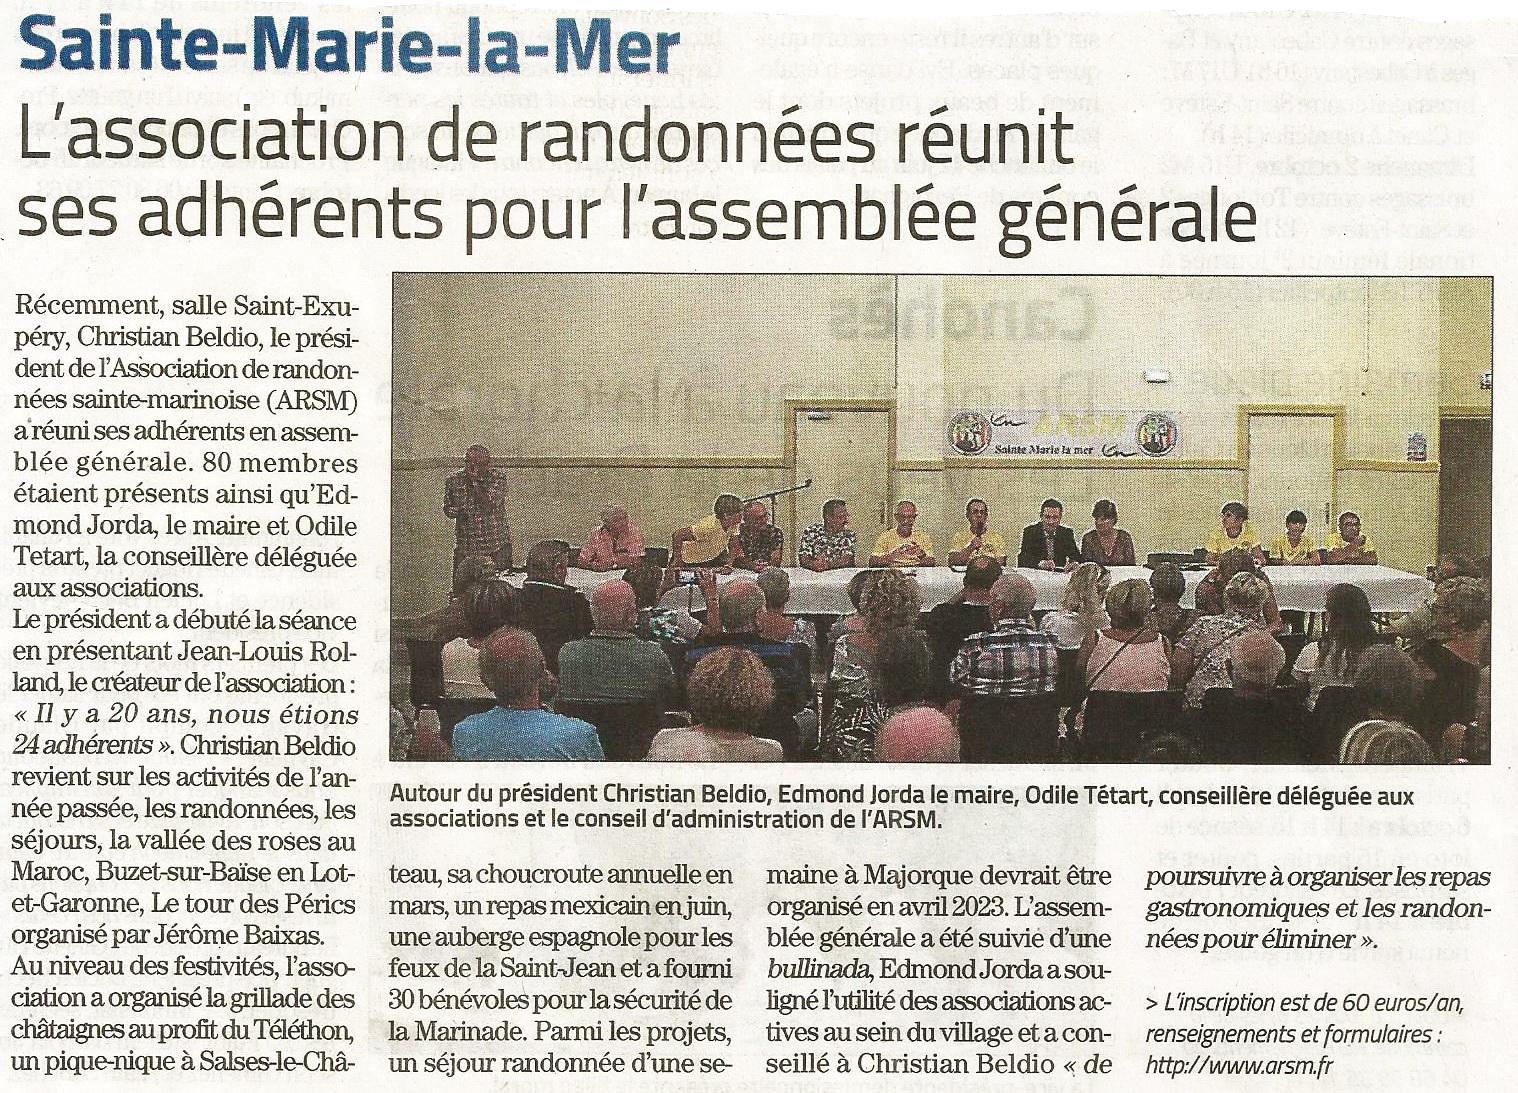 Article independant assemblee generale 29 09 22